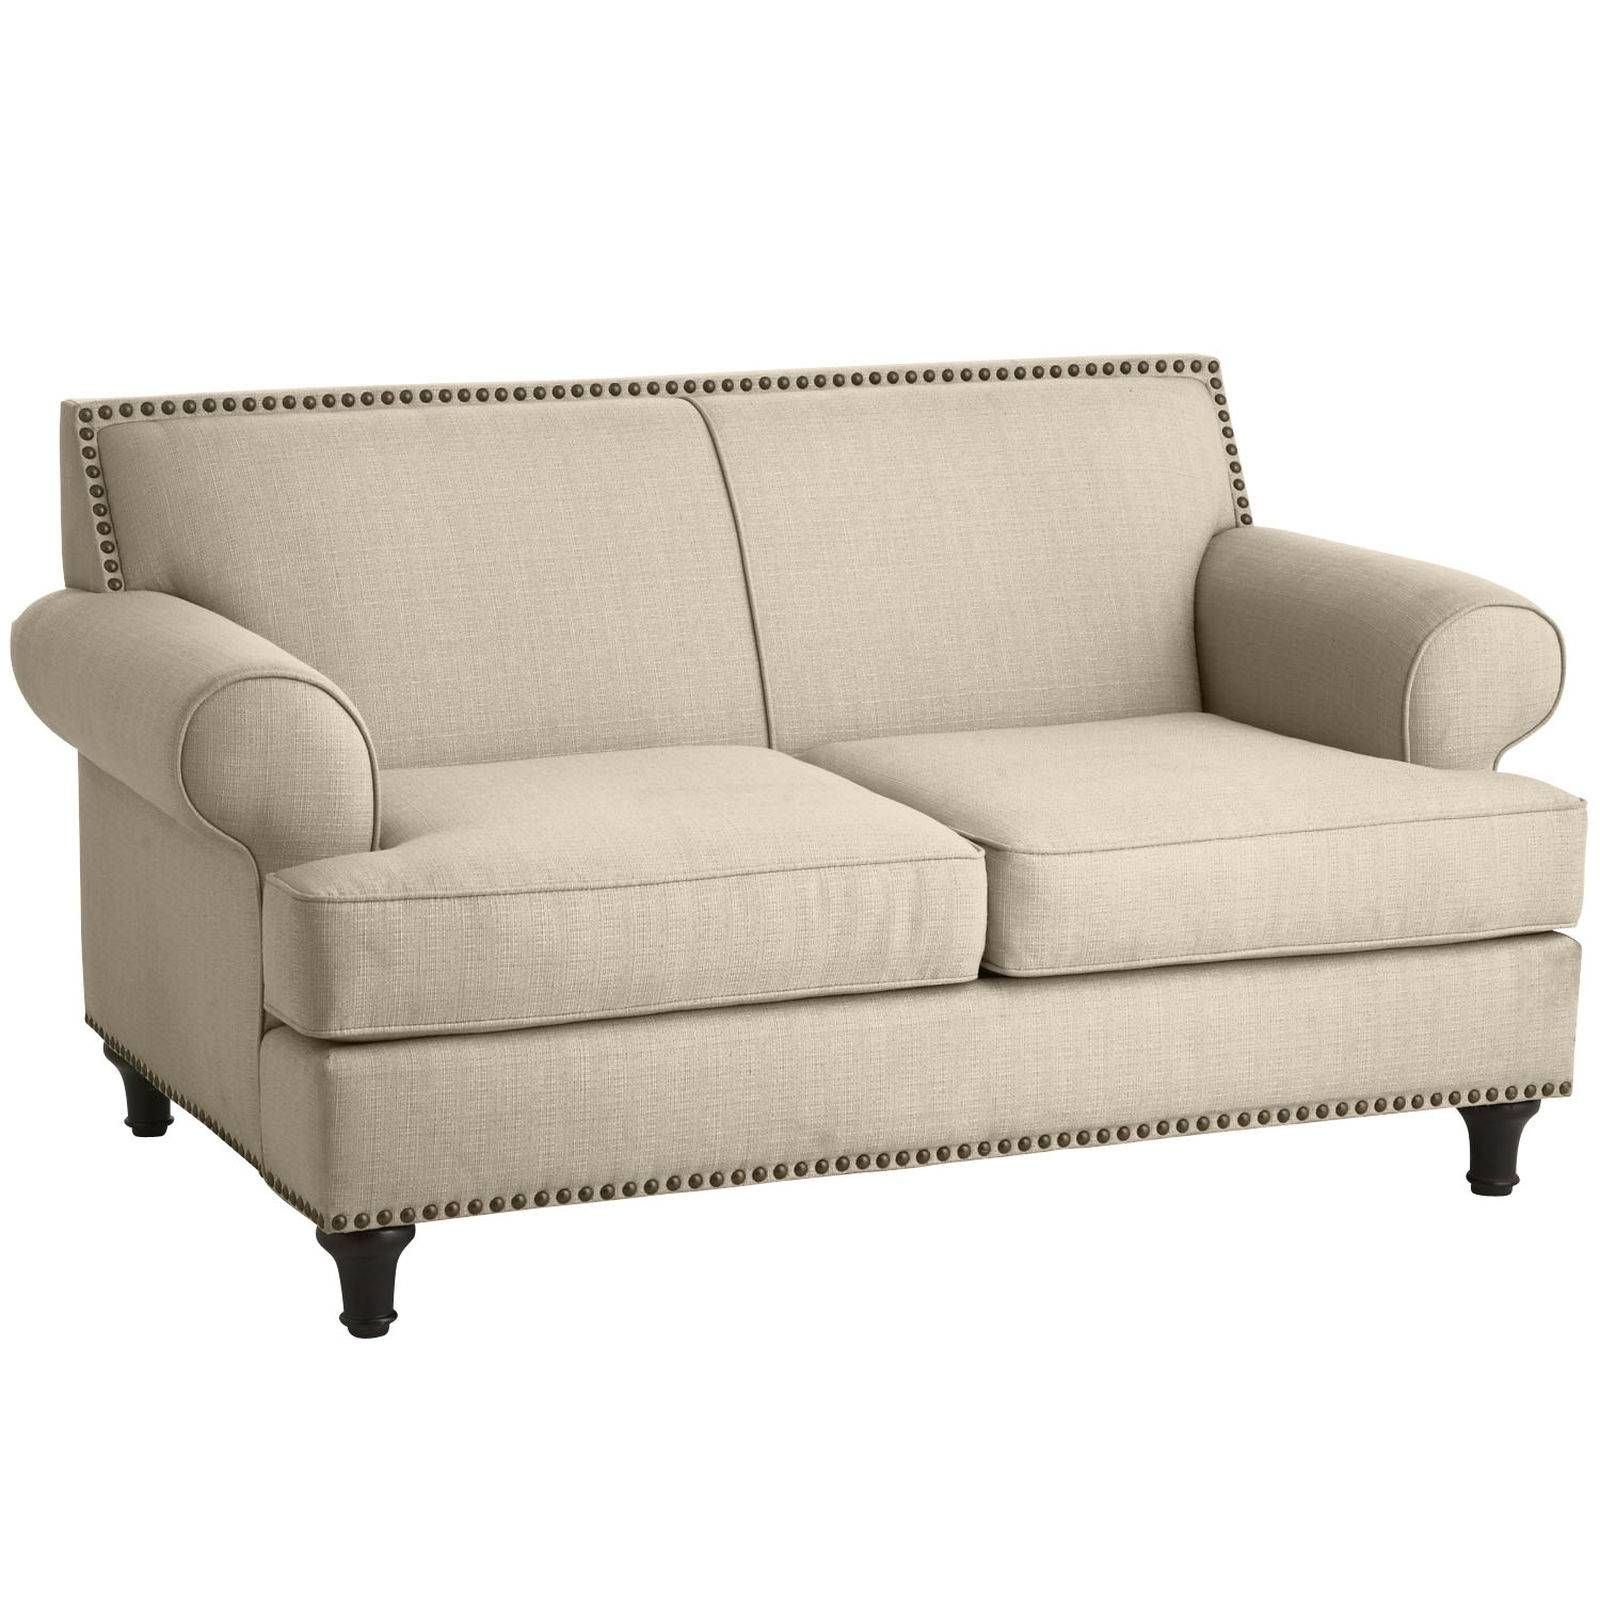 Furniture: Pier One Loveseat | Sofas And Loveseats | Pier 1 Daybed With Regard To Pier One Sleeper Sofas (View 6 of 15)